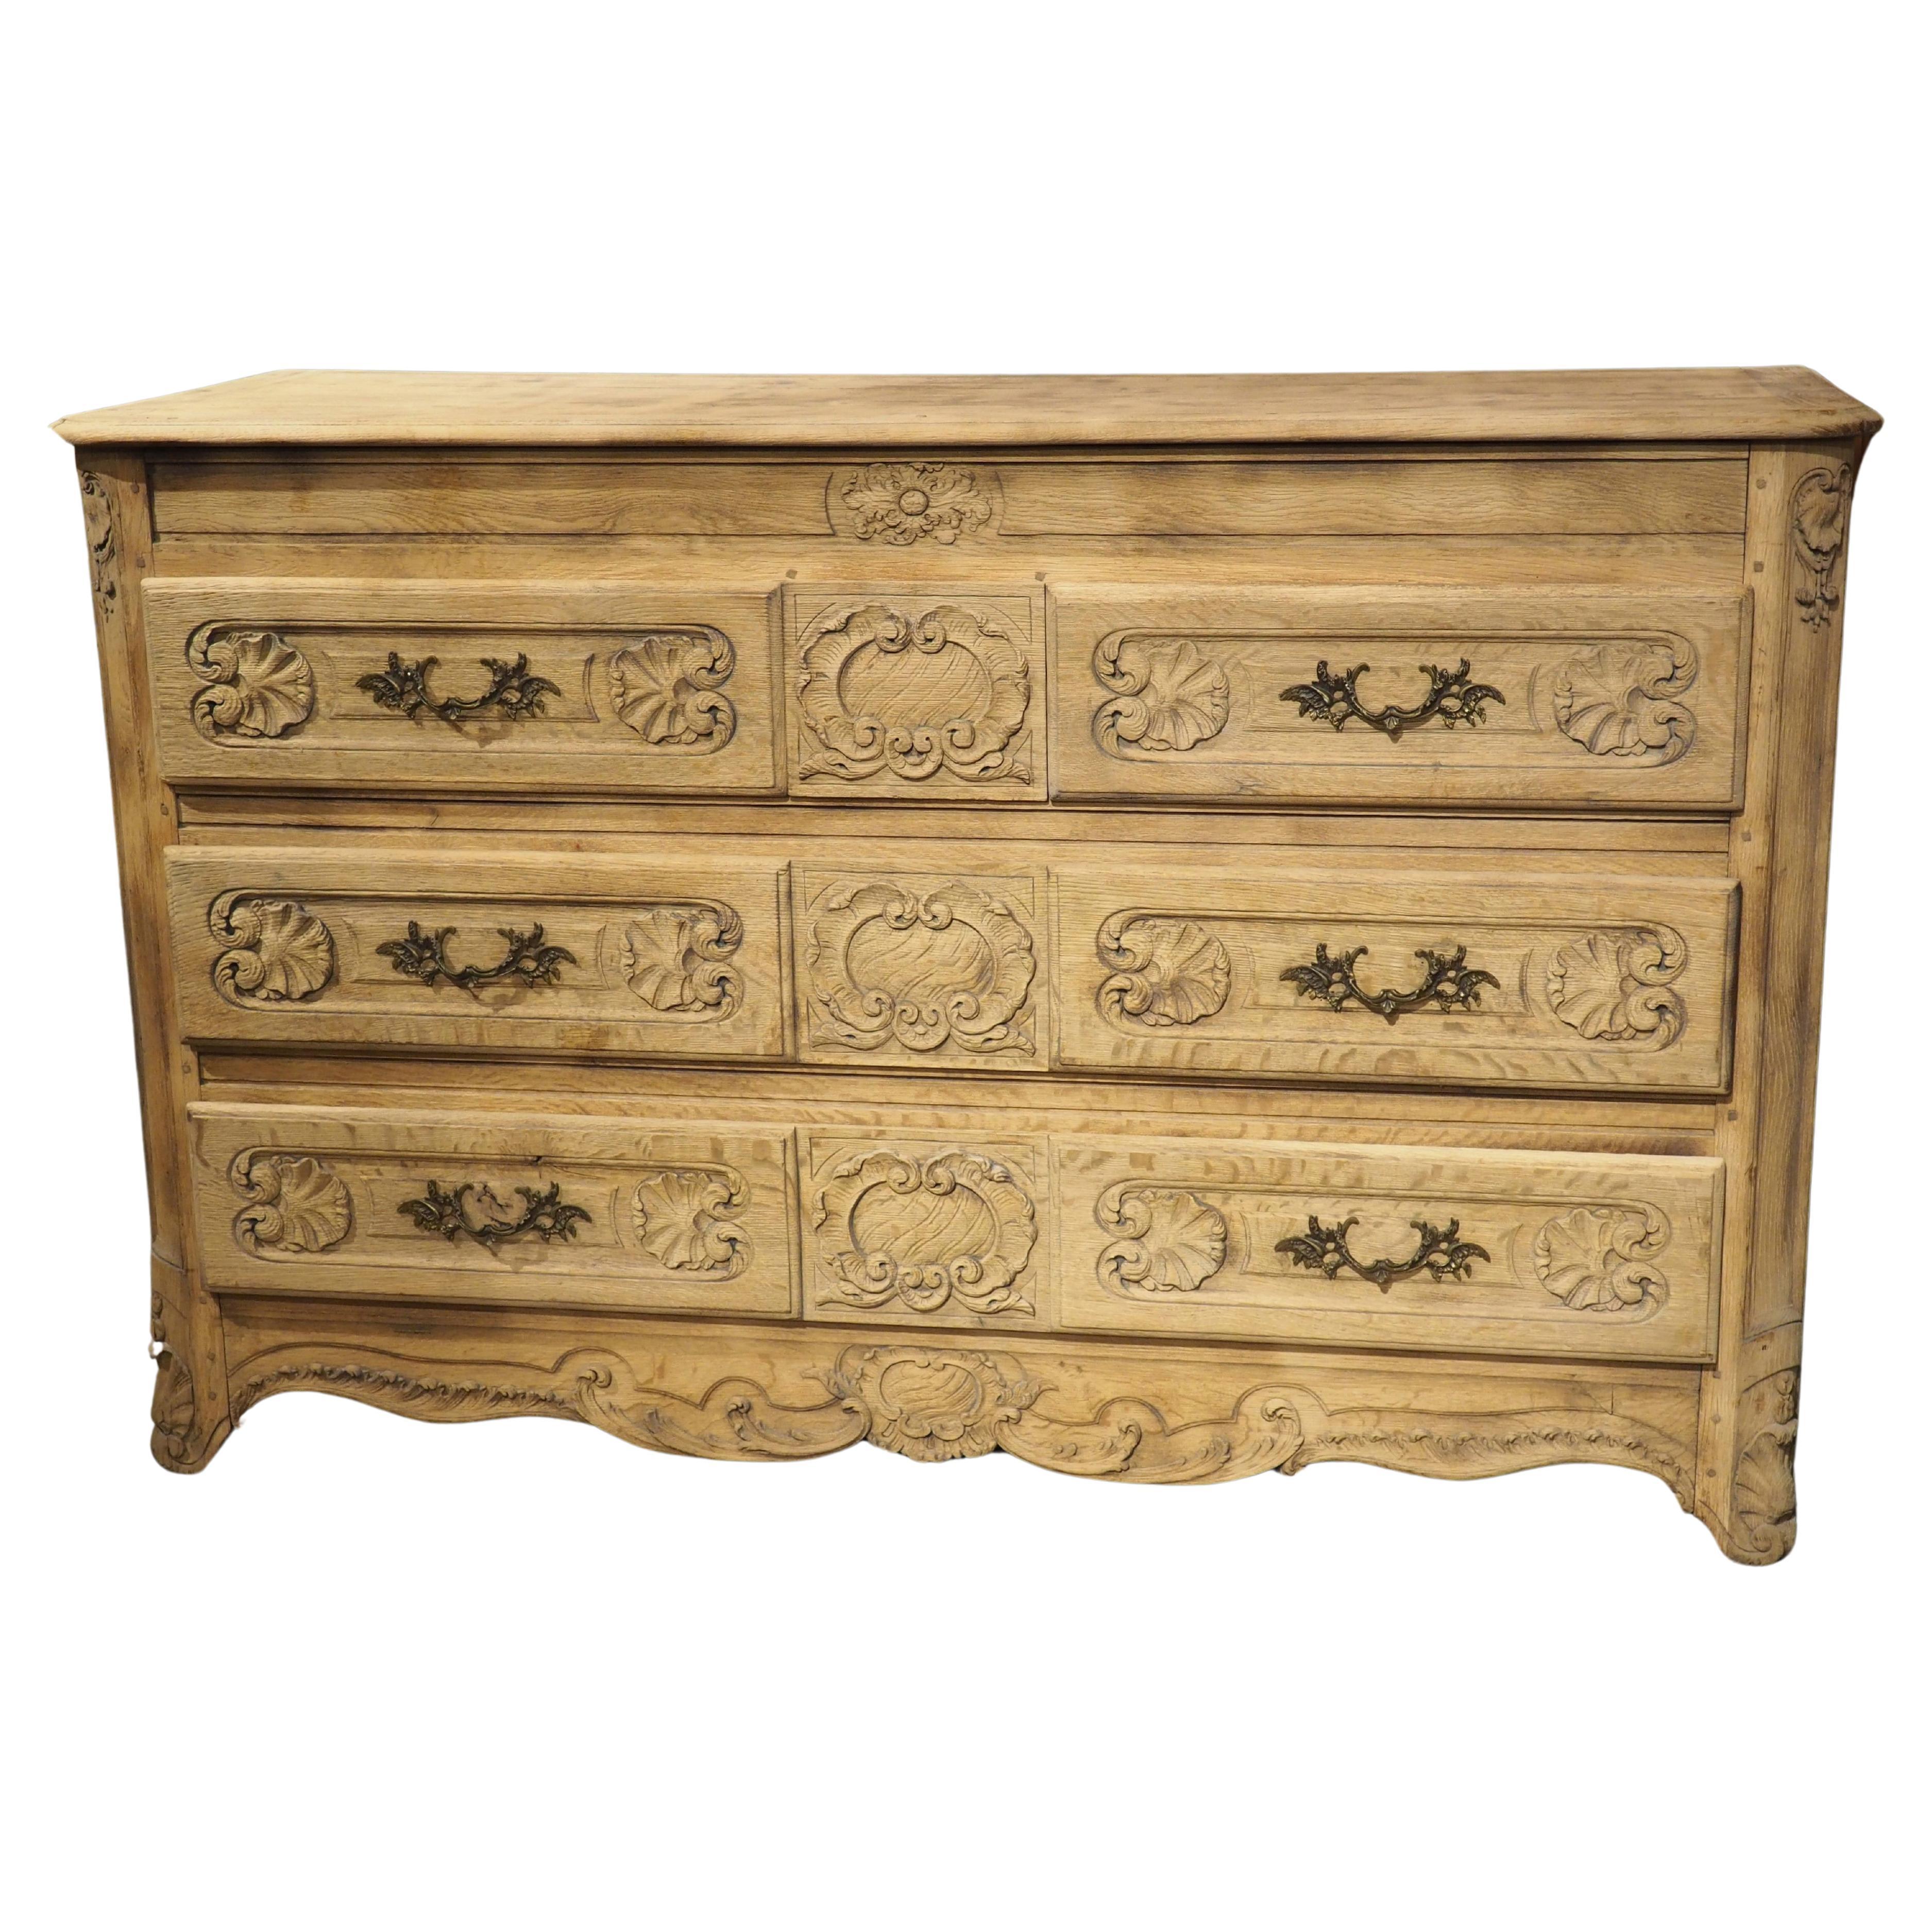 A Large 19th Century Carved Oak Commode from France For Sale